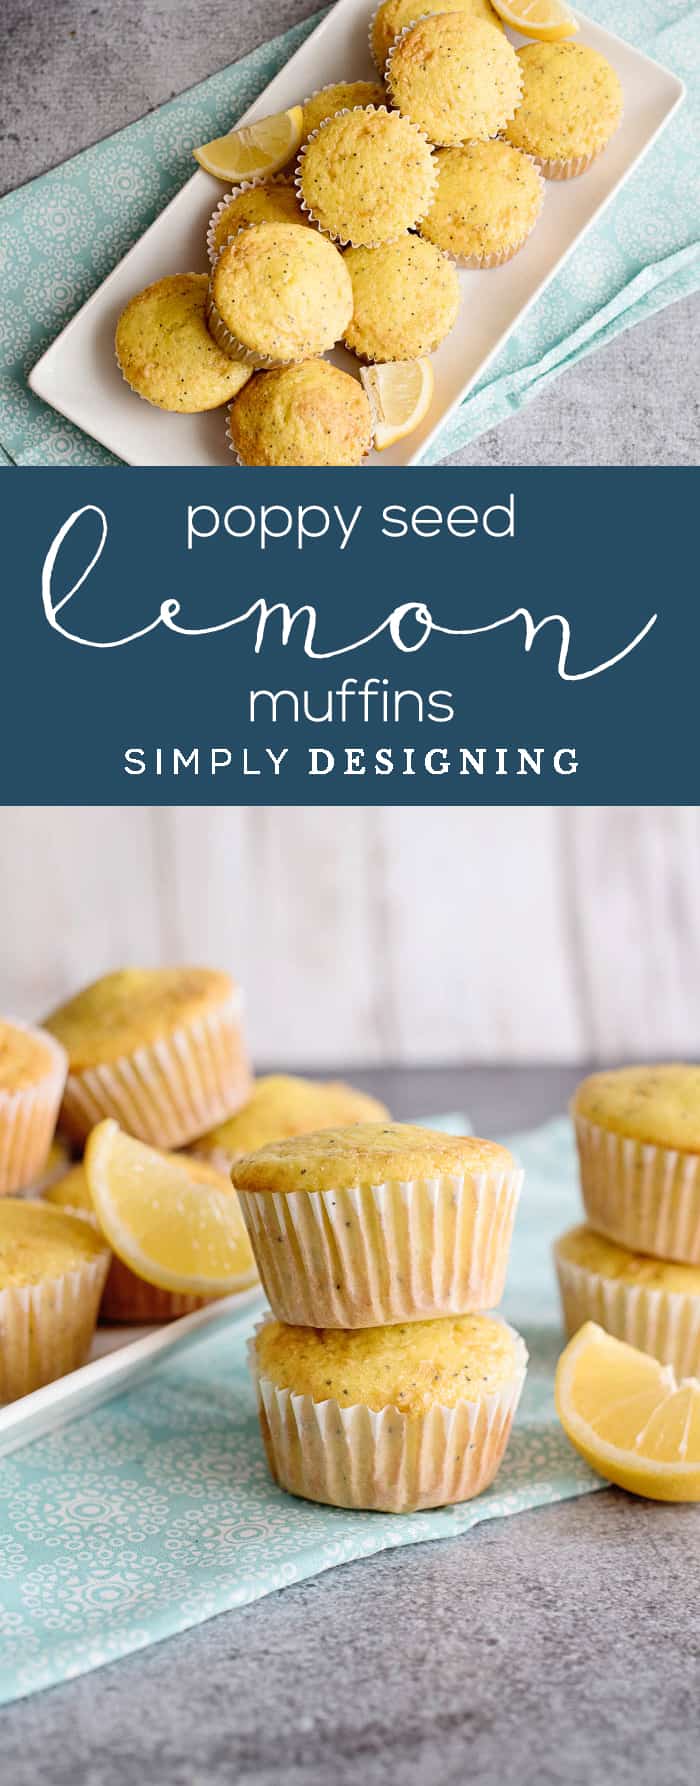 Lemon Muffins with Poppy Seeds - an easy and delicious recipe